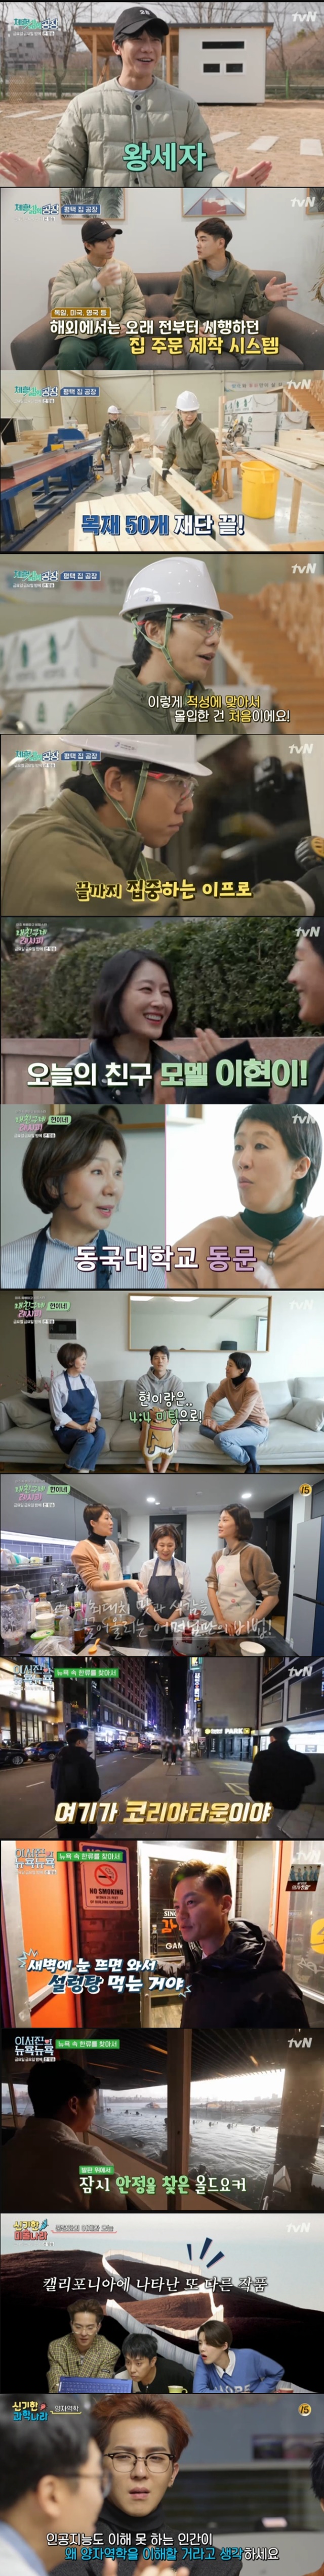 Lee Seung-gi has become the Crown Prince of The Labor.On TVN Friday Night broadcast on March 13, Lee Seung-gi, Lee Seo-jin, Jin-kyeong Hong, Eun Ji-won, Song Min-ho, and Jang Doyeon were fun on different topics such as labor, cooking, science, art and travel.On this day, Lee Seung-gi was motivated to call the Crown Prince of The Labor before full-scale labor in the Factory of Experience Life.When Lee Seung-gi went indoors for the meeting, Na PD said, I will build this house today and deliver it, and Lee Seung-gi was surprised.The quality of the product is not uniform when the manager keeps changing when building a house, and the factory is doing the entire process of building a house to compensate for it.Its a home ordering system that has been in place for a long time, he said.Lee Seung-gi was put into the field and he said, I am worried because I do not have professional skills. The employee explained, It will not be difficult to make automation facilities.Lee Seung-gi has tampered with 50 timbers as staff informed him.Lee Seung-gi smiled, saying, If I did not become a singer or an actor, I would have been doing this job. Lee Seung-gi said, I have never been so good at going to nine factories.Lee Seung-gi then built sides and modules, cut tiles, and even worked on exterior materials. Lee Seung-gi said, It is really unusual and many people do not know.I was looking forward to seeing how a young and wonderful corporate culture would grow, he said.My very special and secret friends recipe, Jin-kyeong Hong, found model Lee Hyun-yis home.Jin-kyeong Hong ordered walking as soon as he met Lee Hyun-yi, and Lee Hyun-yi turned into a professional model and made the street in front of the house a runway.Jin-kyeong Hong decided to learn Lee Hyun-yis recipe, which was humbling, saying, Im not so good at it, Im in good spirits.My husband had a Hong family name at Dongguk University alumni such as Jin-kyeong Hong, said her mother-in-law.Lee Hyun-yis husband appeared later, and Jin-kyeong Hong praised him for beautiful: he resembles actor Jung Chan.I heard that she looked more like a person who was more cool than Jung Chan, she said. I heard a lot about her being like a cozy person.When Jin-kyeong Hong said, The high water was too much, her mother-in-law laughed when she revealed that she resembled Park Jin-young.Lee Hyun-yis husband said, When I was in the company, I met my wife in a four-to-four meeting. Lee Hyun-yi liked it the most.Lee Hyun-yis mother-in-laws express recipe was steamed ribs - the point being to oil out and soften the meats meat.My mother-in-law said that she chose the menu as my childrens favorite ribs.Jin-kyeong Hong teased Lee Hyun-yi, It looks like a Vesitarian, but its a meat wave?In New York City New York City, Lee Seo-jin found Koretown in New York City.Lee Seo-jin cited Seolleungtang, a video store, and a Korean-American mart as the regular stores in Koretown; the two who ate at Seolleungtang restaurant headed to the jjimjilbang in New York City.The first to find an open-air hot tub, but Lee Seo-jin did not try to get into the cold weather; Lee Seo-jin, who managed to get into the footbath, entered the wet sauna and melted himself.After that, I enjoyed the jjimjilbang by visiting charcoal kiln, loess room, and kiosk.In The Wonderful Art Country, Eun Ji-won, Jang Doyeon, and Song Min-ho took a lecture on landscape painting from Professor Yang Jung-moo.The painter who painted the Dutch countryside realistically did not sell his paintings until the age of 39, but he became popular with the city people in the 19th century industrial revolution.William Turner of England explained that he was called an impressionist and was mocked for the first time.In the 20th century, it changed from art to art using five senses.Street art is an art that puts art works outside. The artist made his own breakwater in the salty sea and changed the work every moment according to the change of sea level.There were also works of art that struck and demolished a huge fence like the Great Wall for two weeks, and among Korean artists, Jeon Su-cheon crossed the U.S. by wearing a train in white cloth.Choi Seung-hye